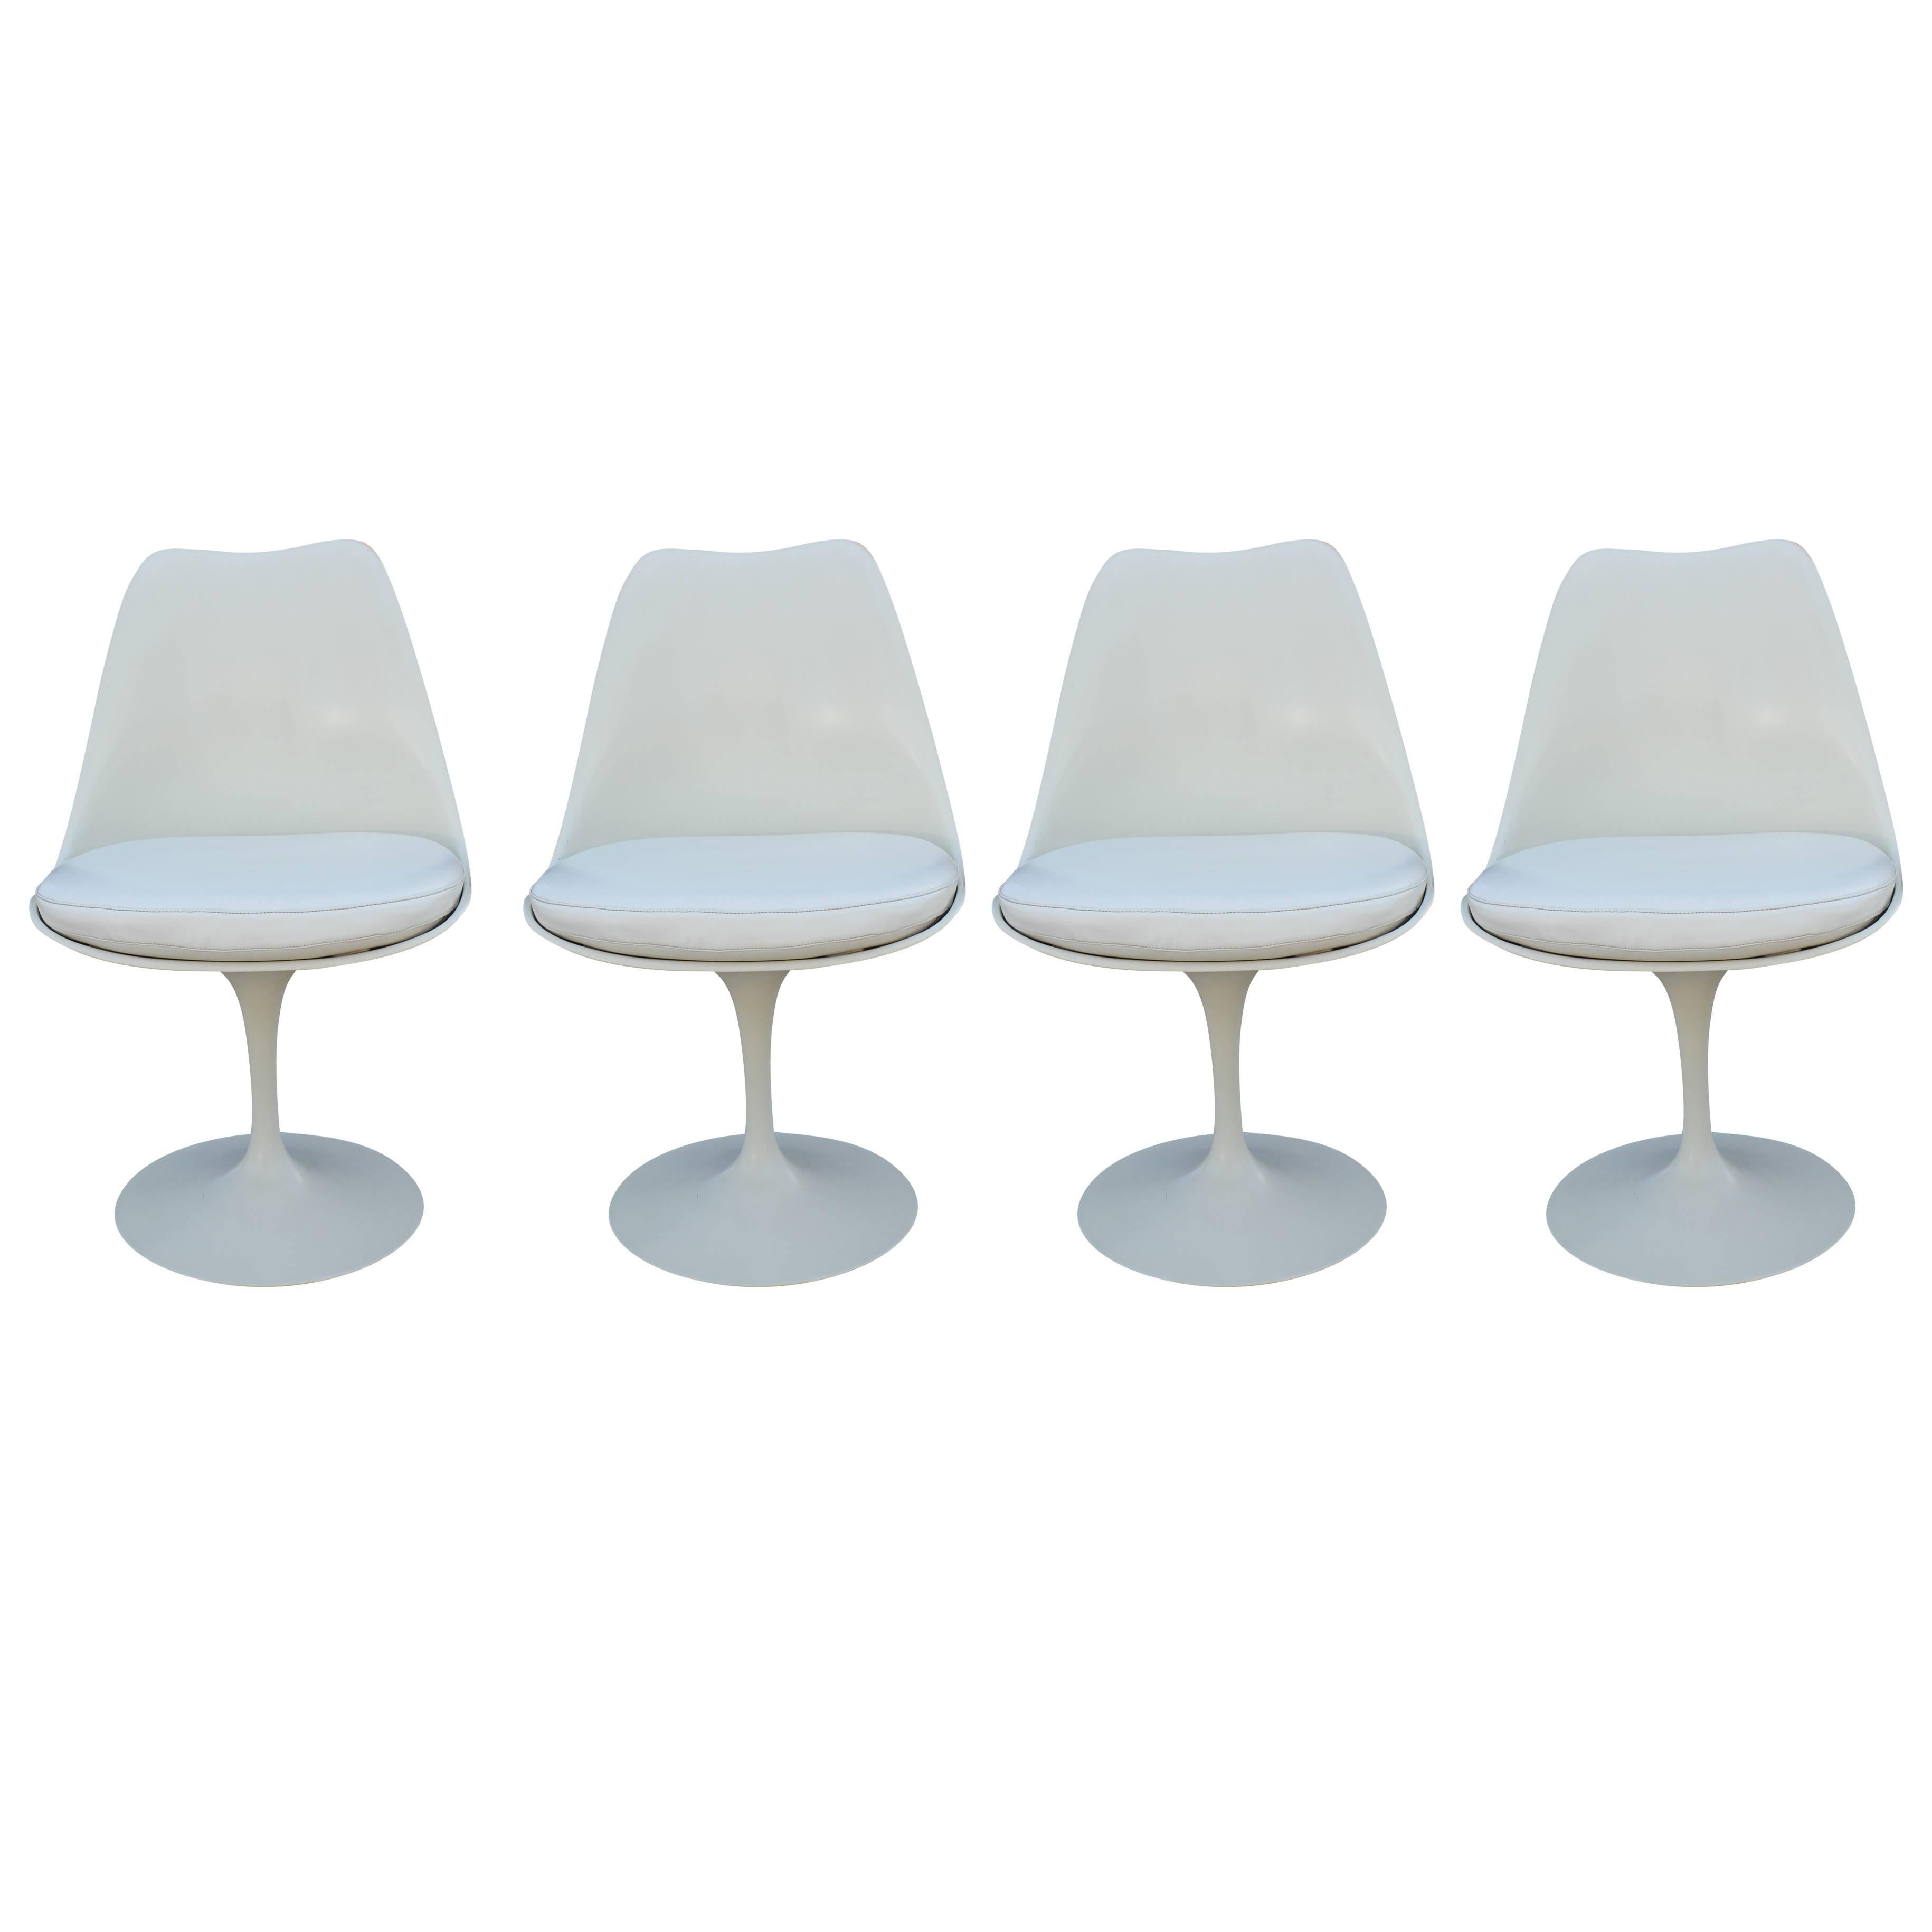 Set of Four Early Eero Saarinen Tulip Chairs by Knoll